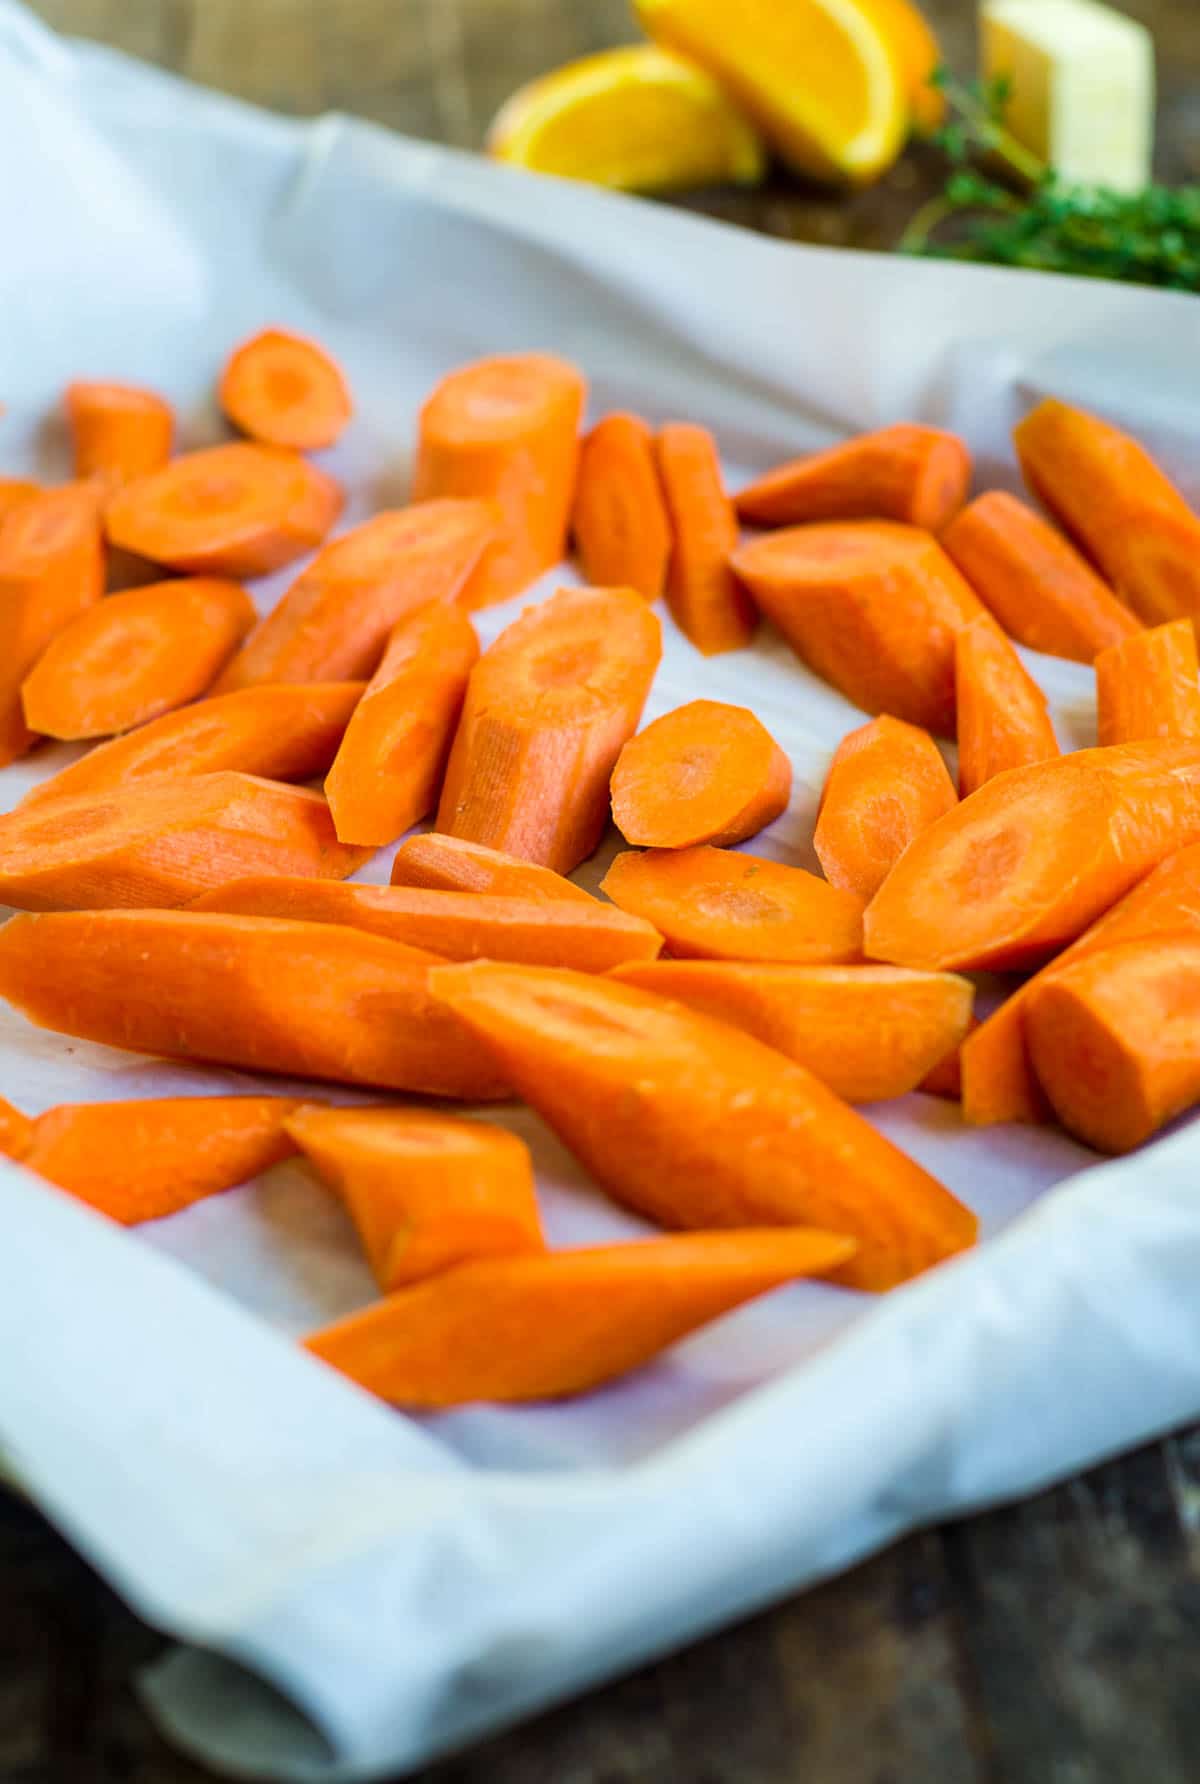 A sheet pan of carrots cut on a bias for roasting.